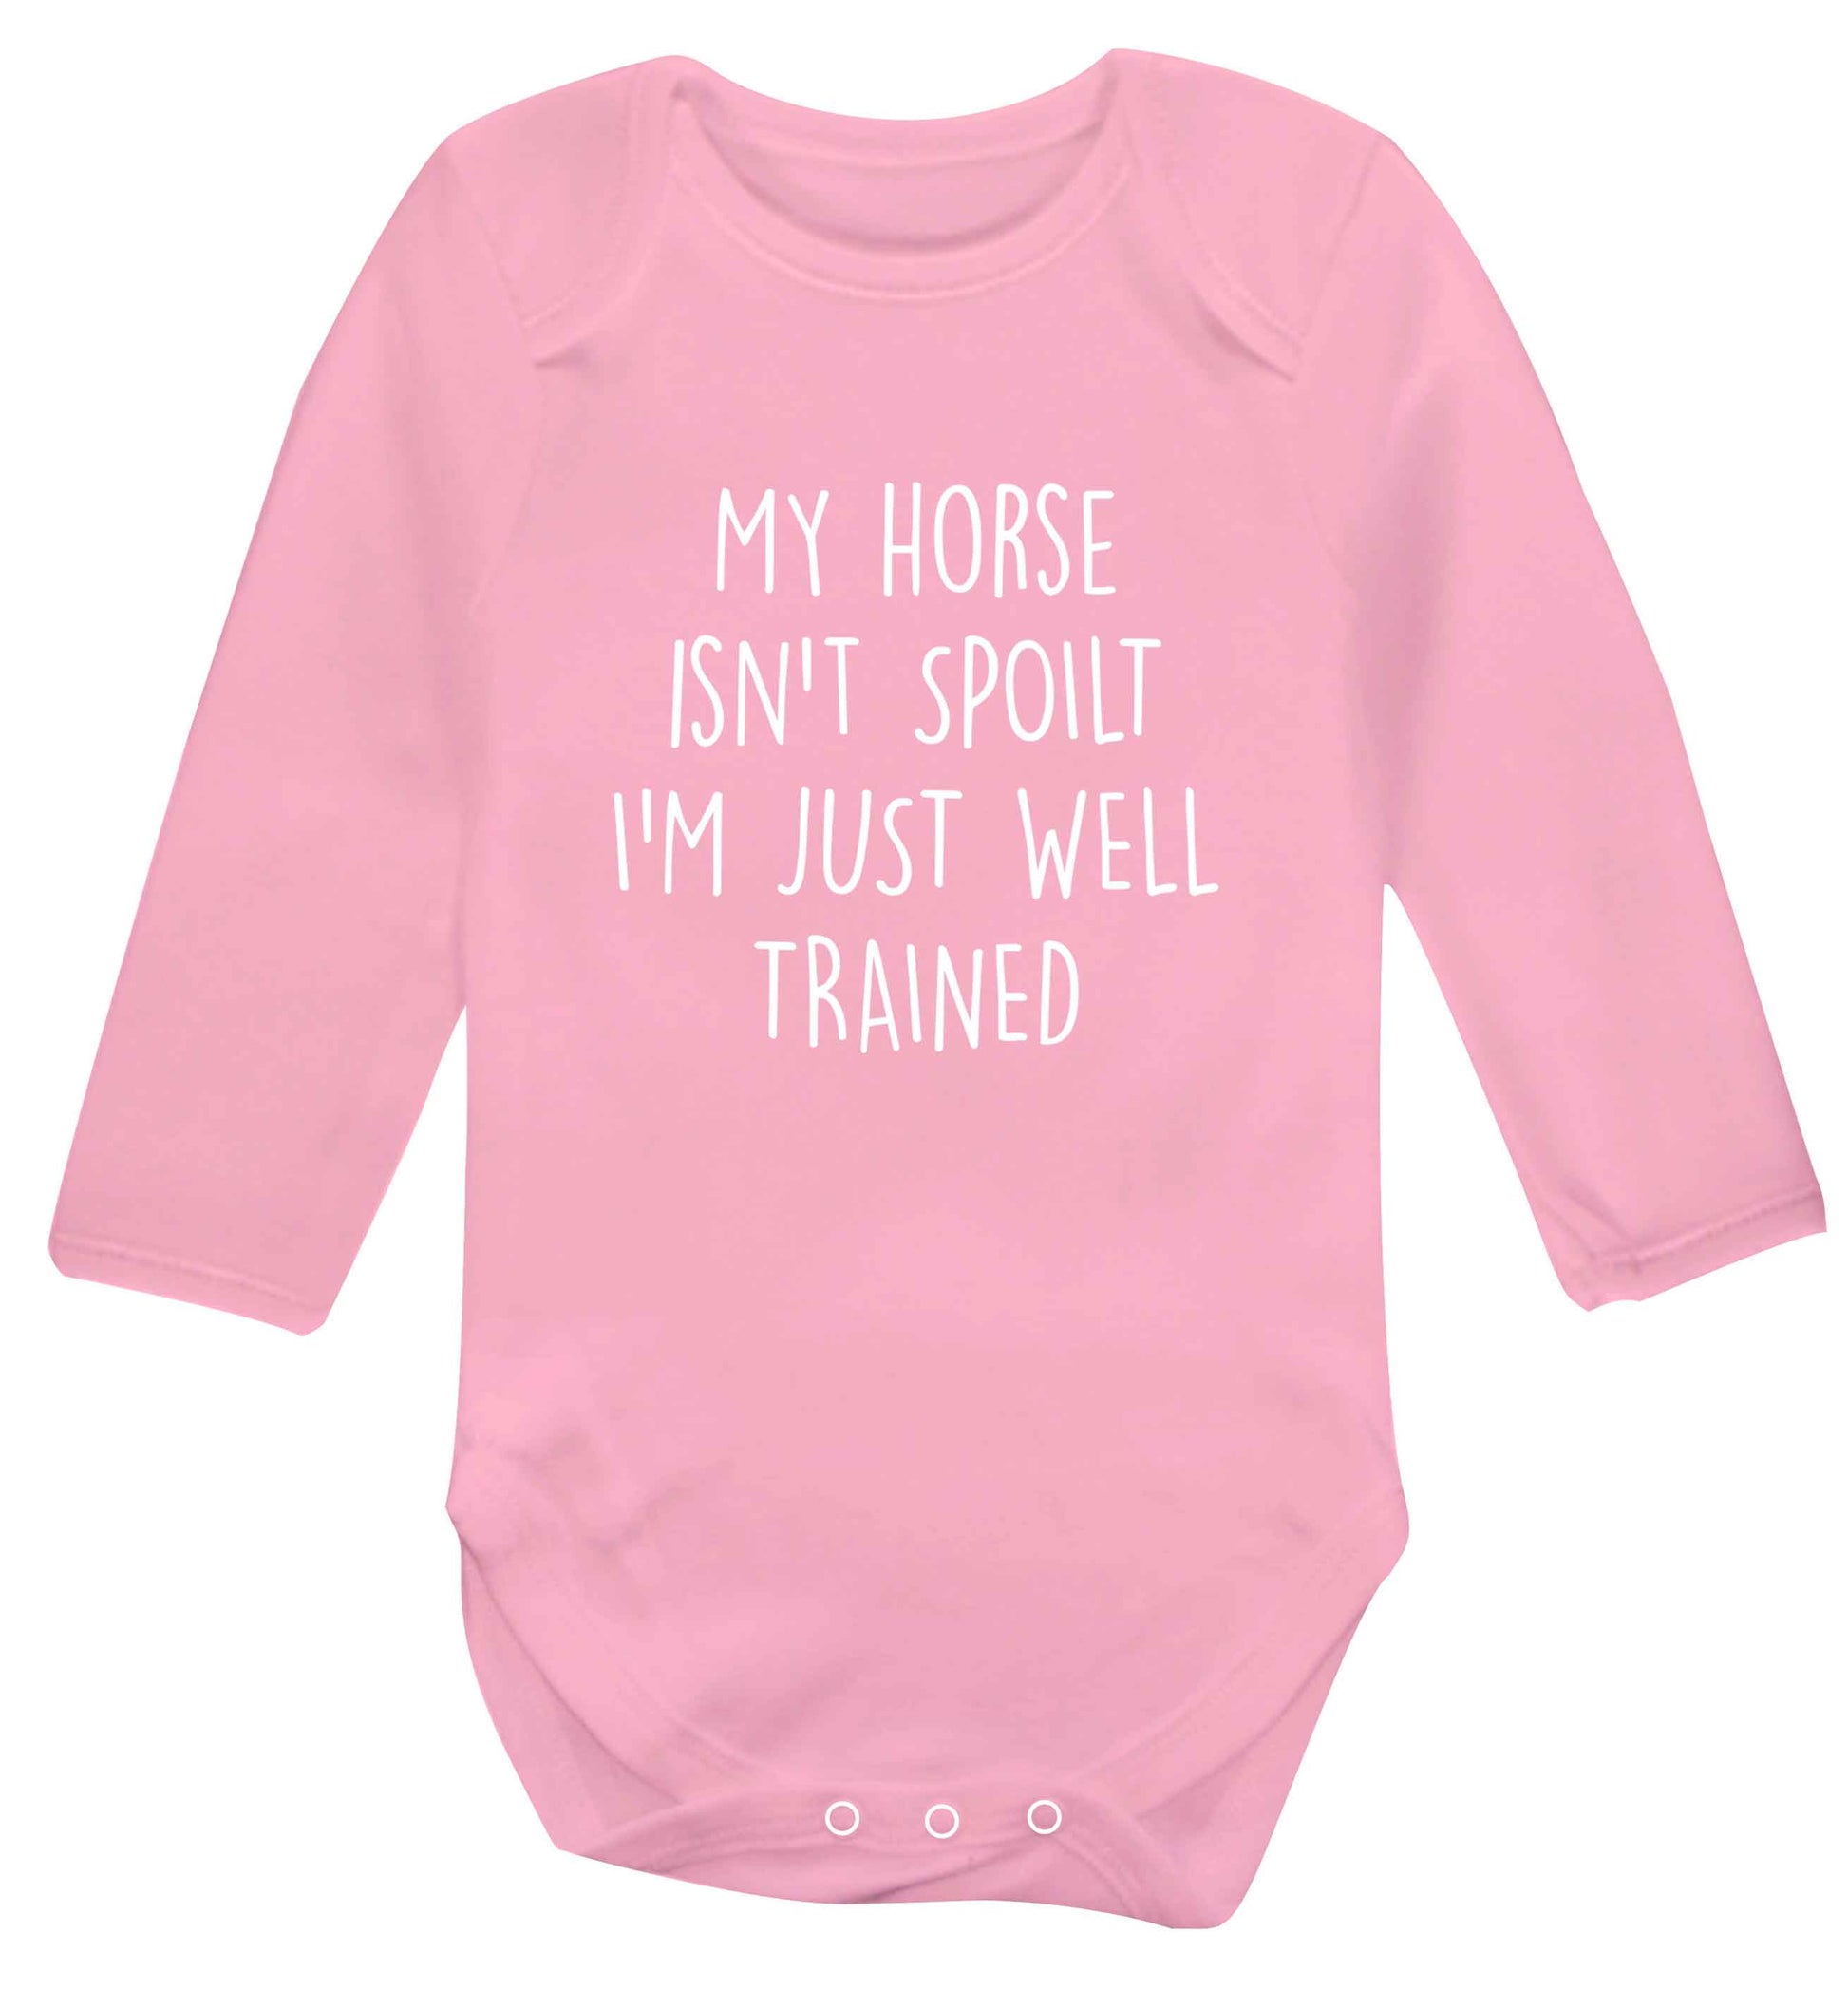 My horse isn't spoilt I'm just well trained baby vest long sleeved pale pink 6-12 months